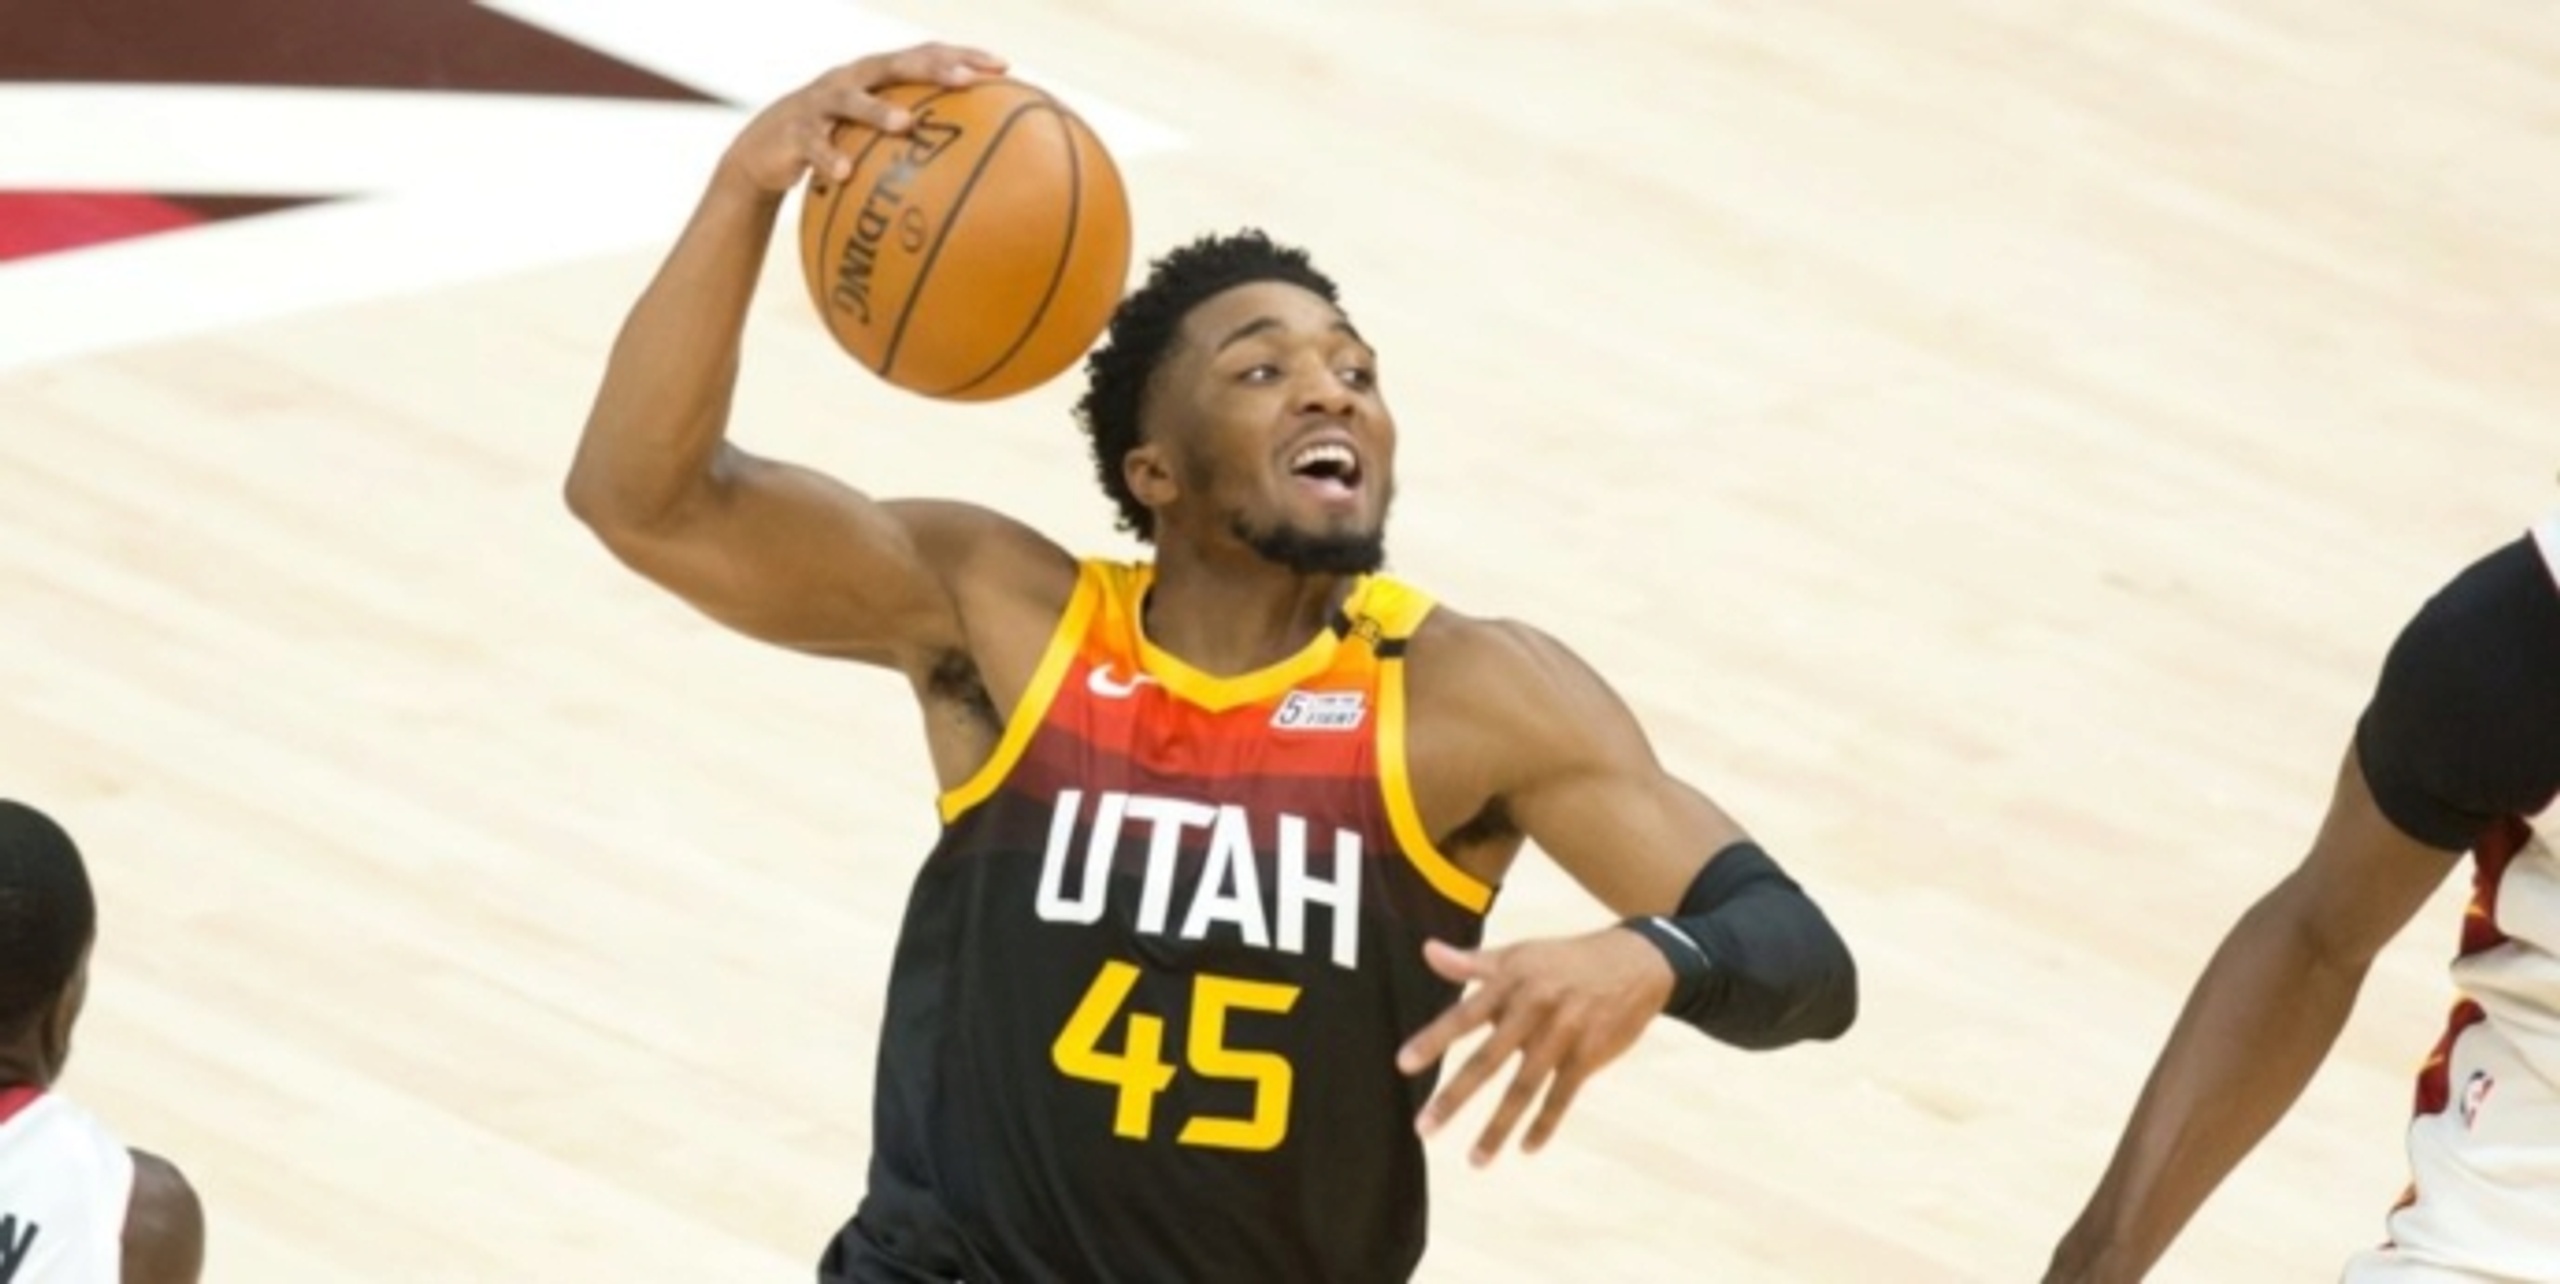 Shaquille O'Neal owes Donovan Mitchell a public apology